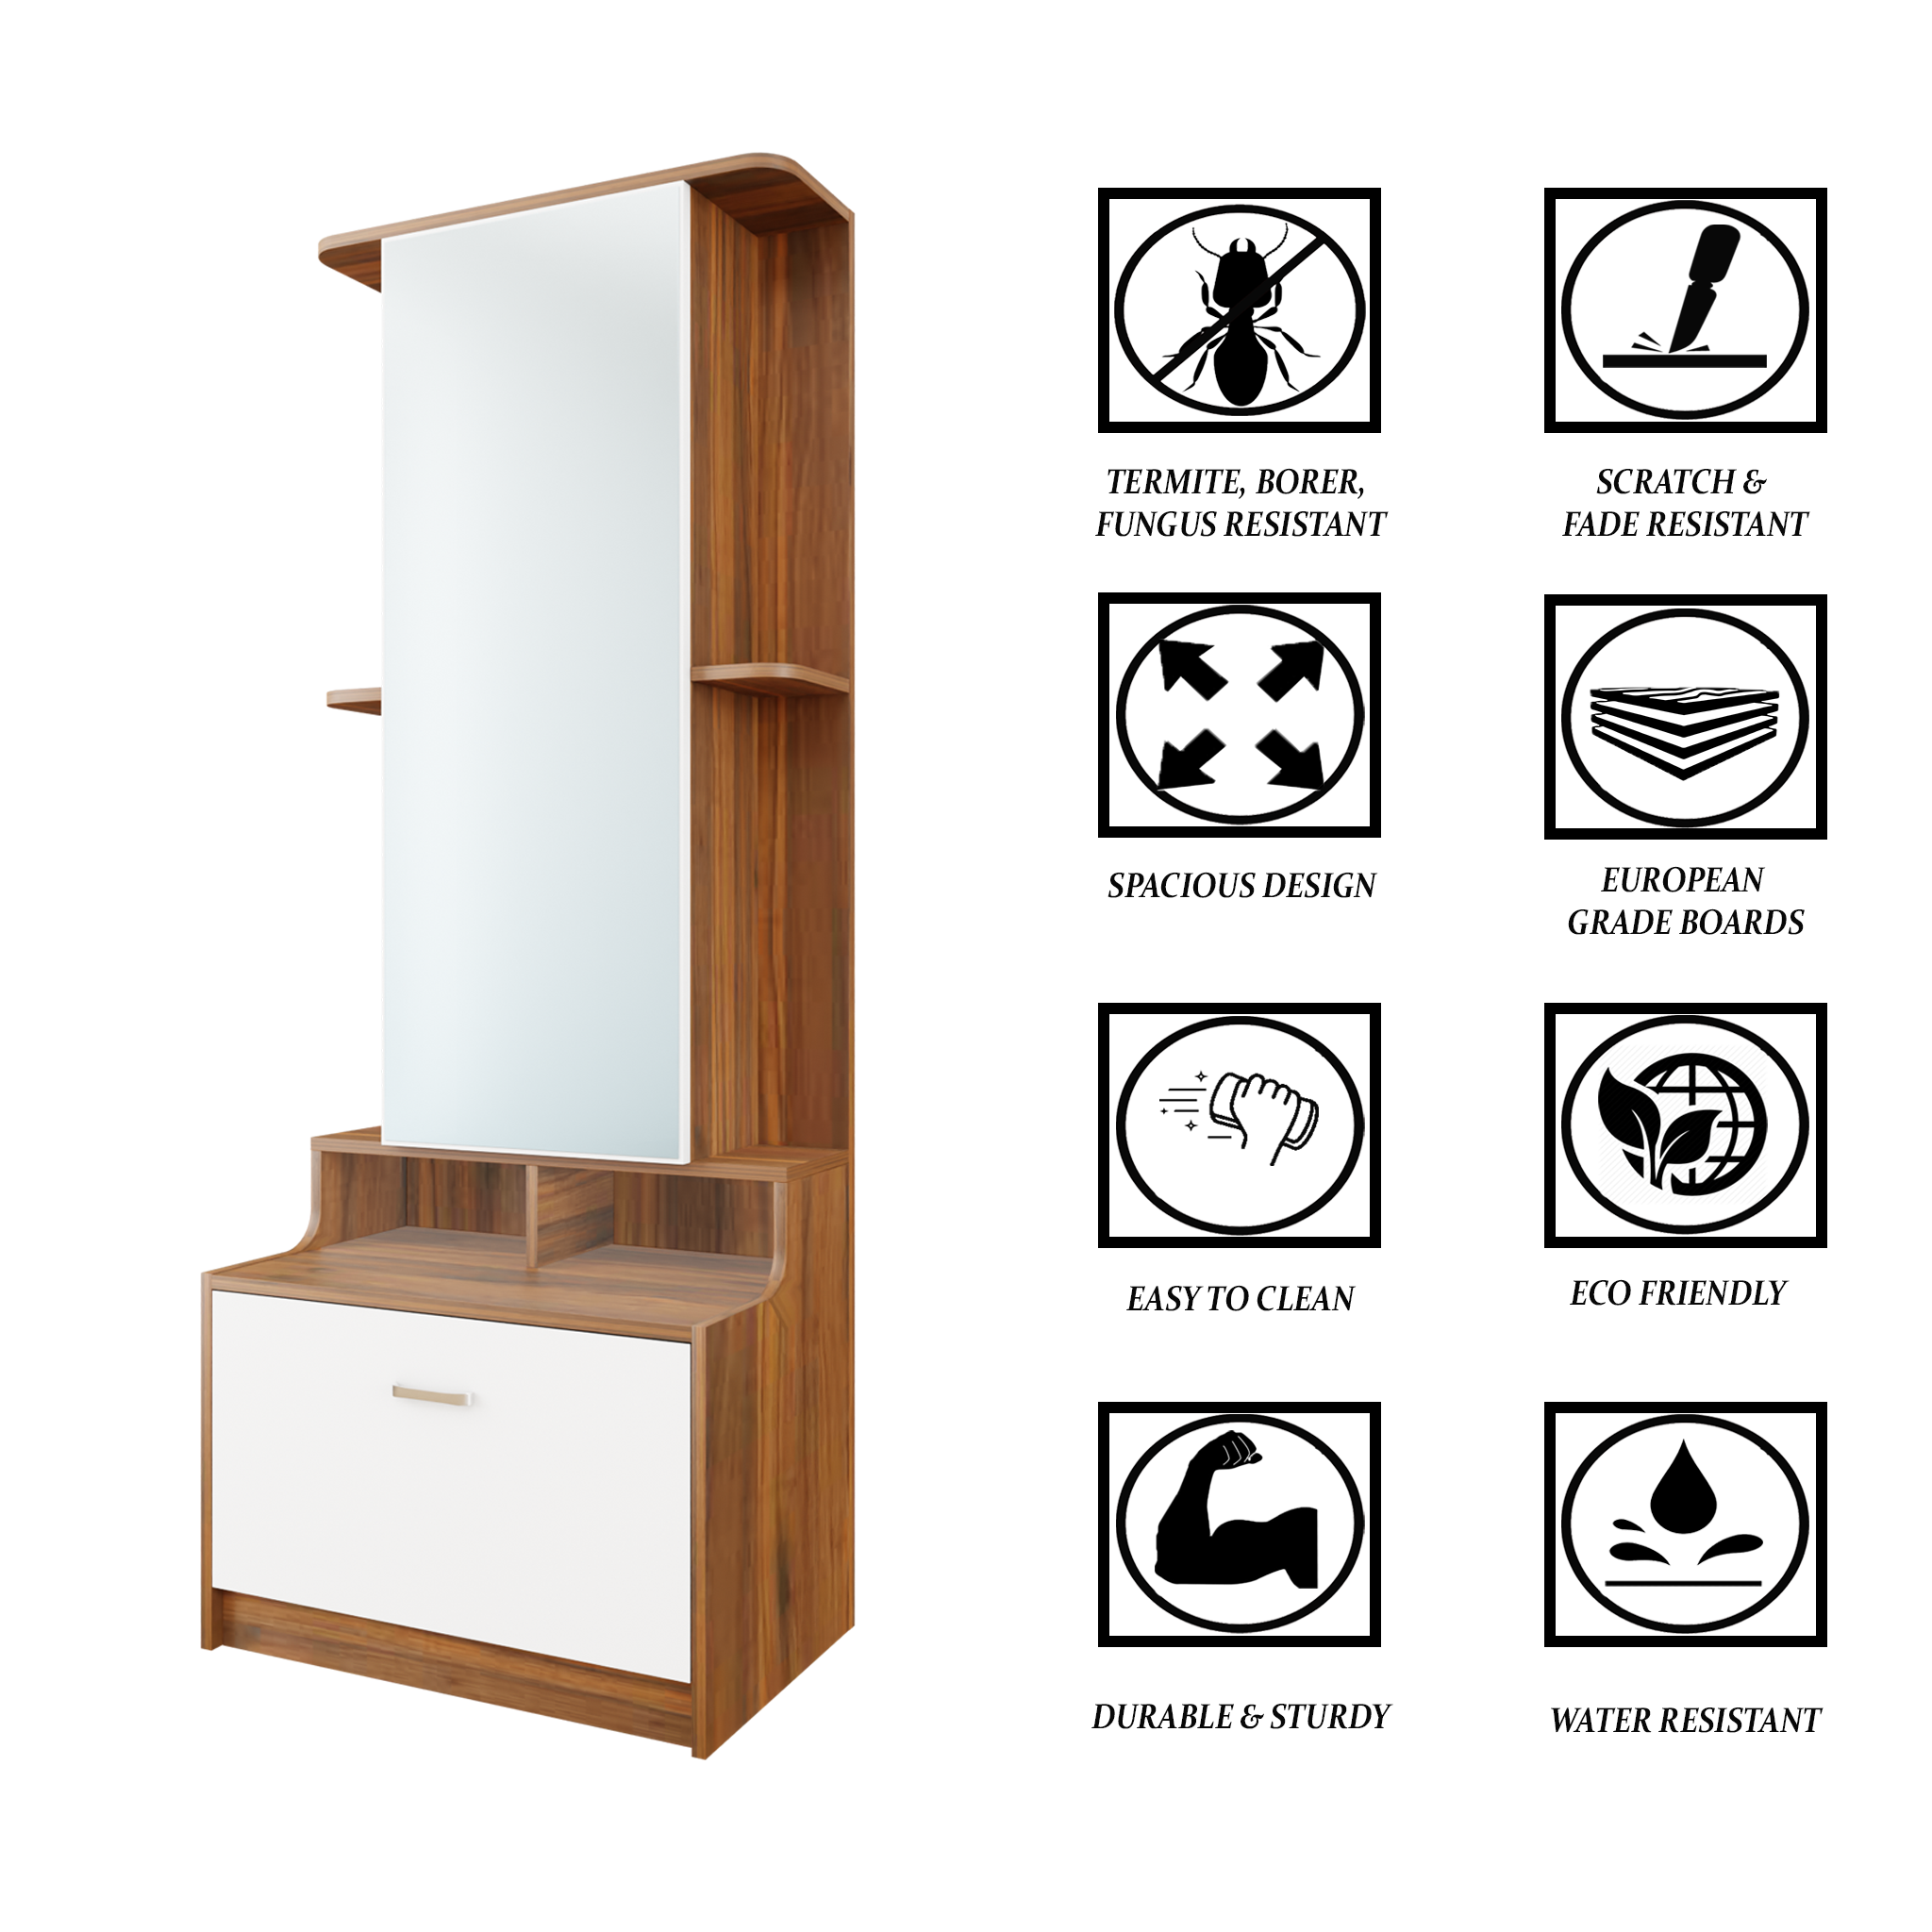 Wardrobe With Dressing Table - Buy Wardrobe With Dressing Table online at  Best Prices in India | Flipkart.com